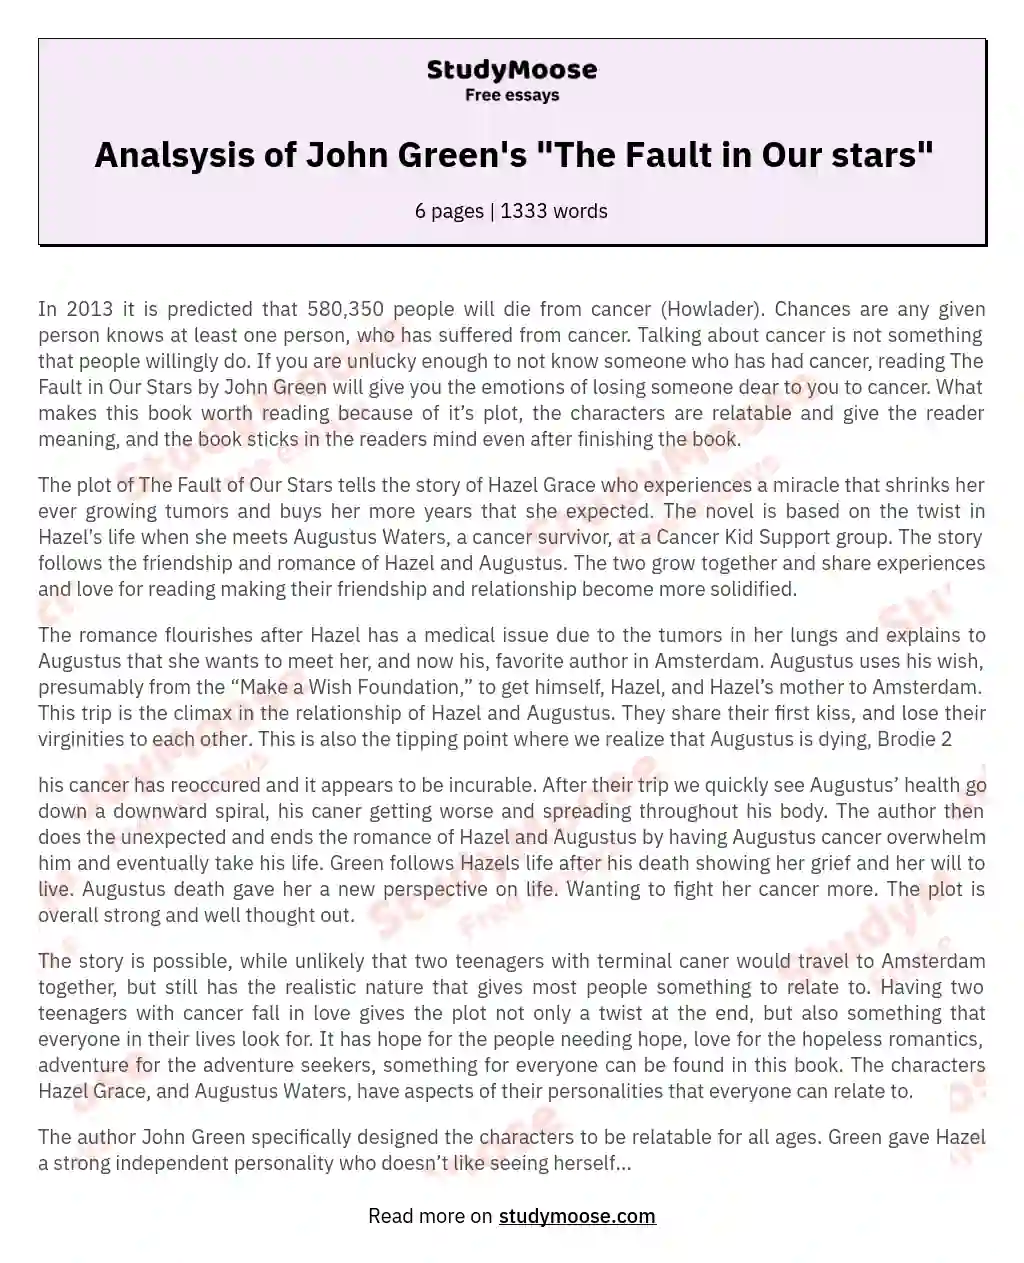 Analsysis of John Green's "The Fault in Our stars" essay